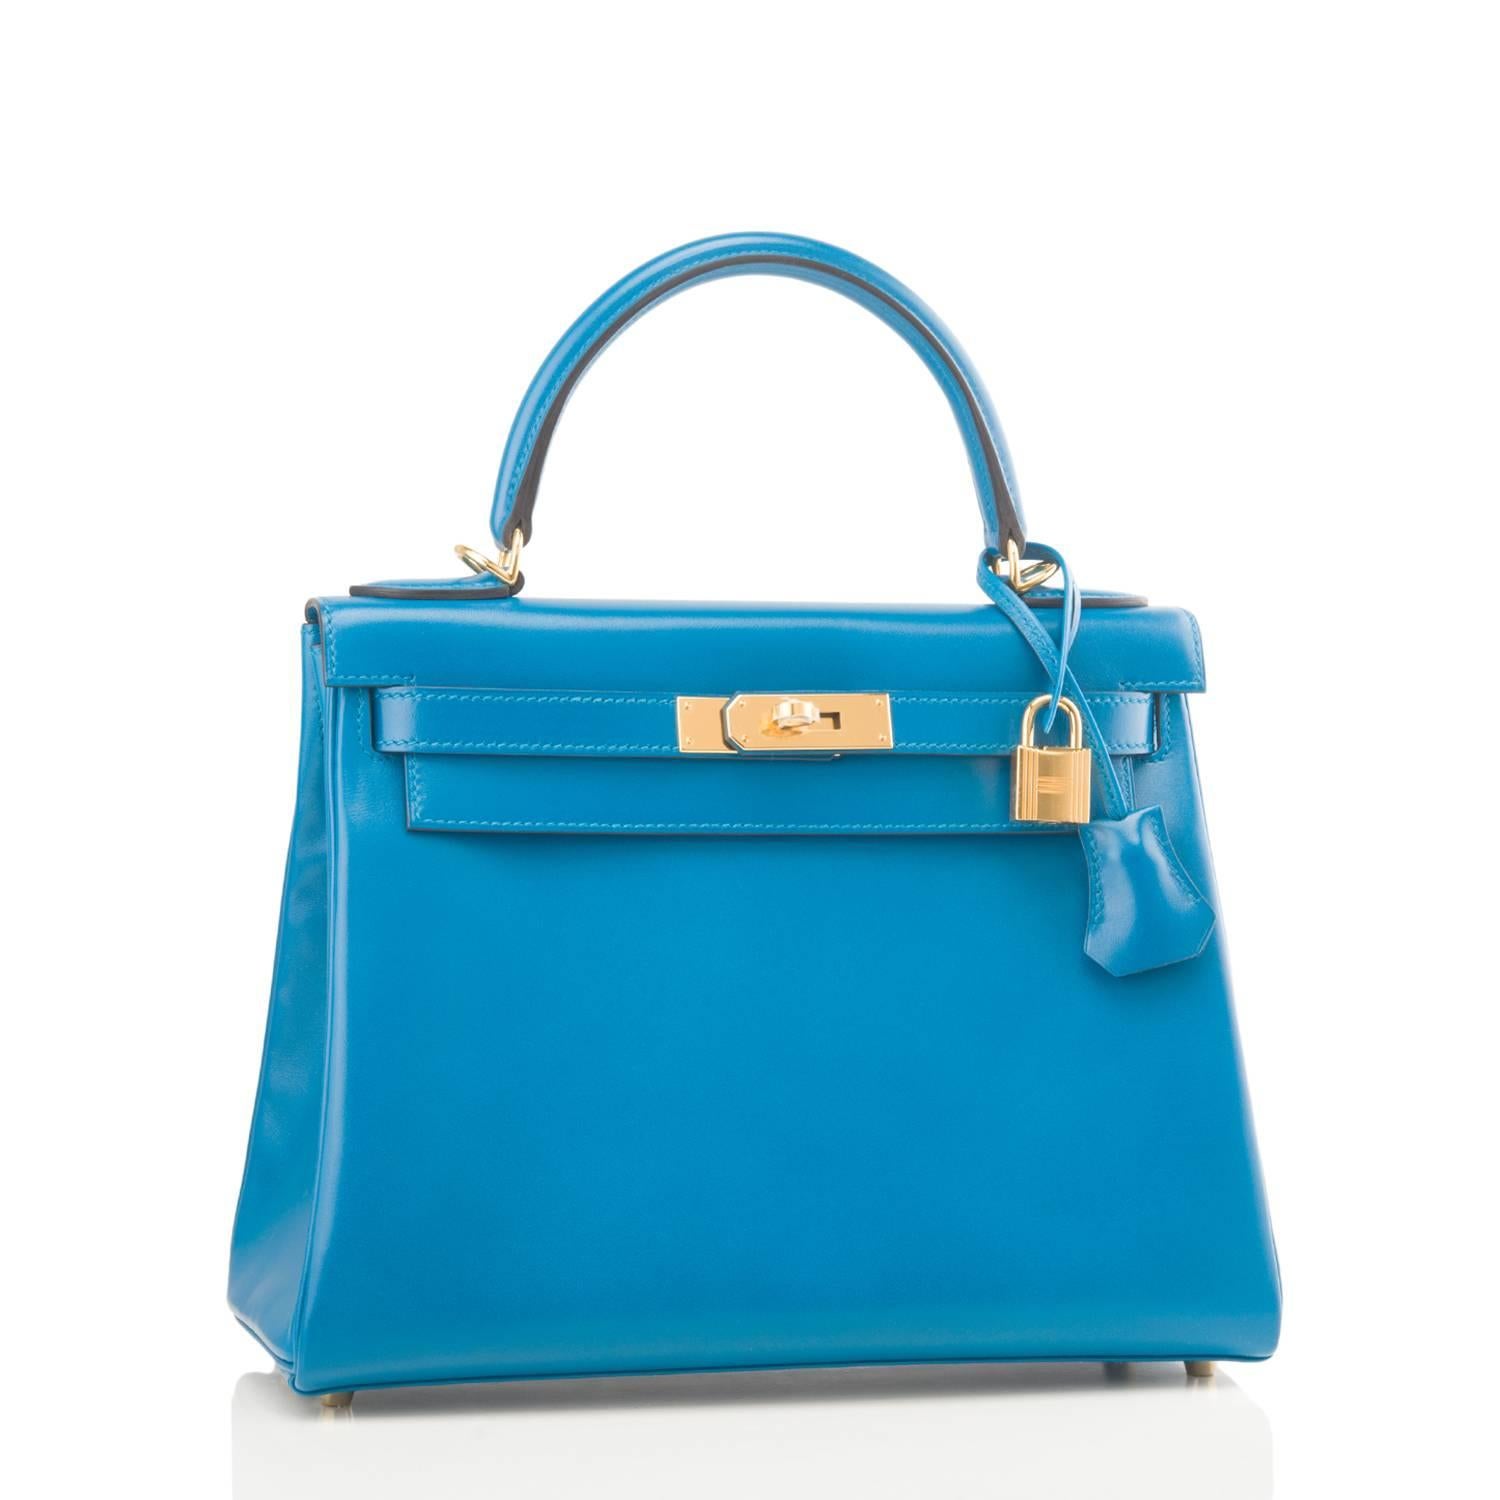 Hermes Blue Izmir Kelly 28cm of Tadelakt leather with gold hardware.

This Kelly, in the Retourne style, has tonal stitching, a front toggle closure, a clochette with lock and two keys, a single rolled handle, and a removable shoulder strap.

The